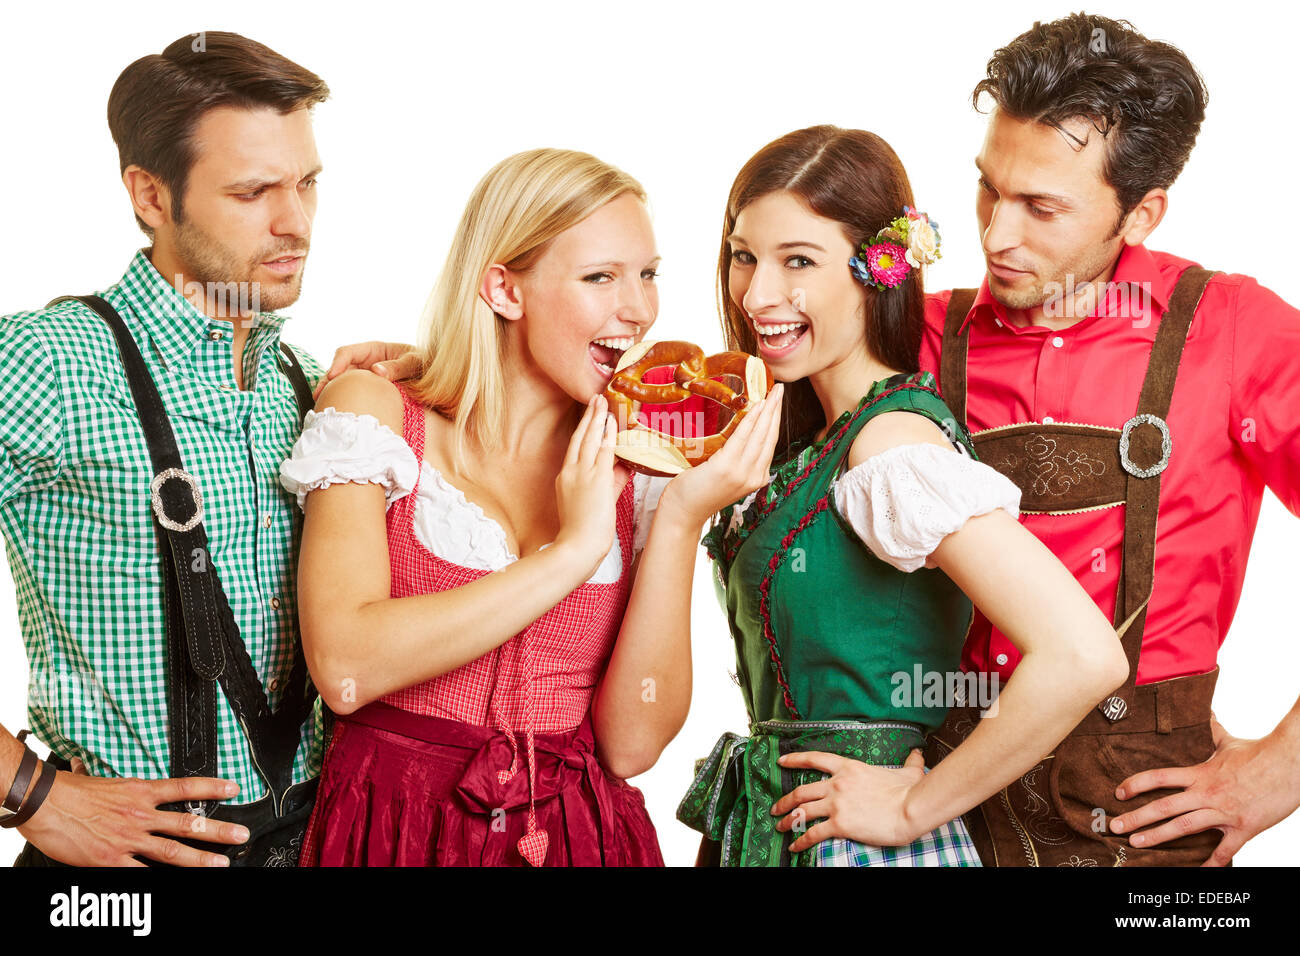 Two women in Bavaria eating a pretzel in front of their jealous men Stock Photo